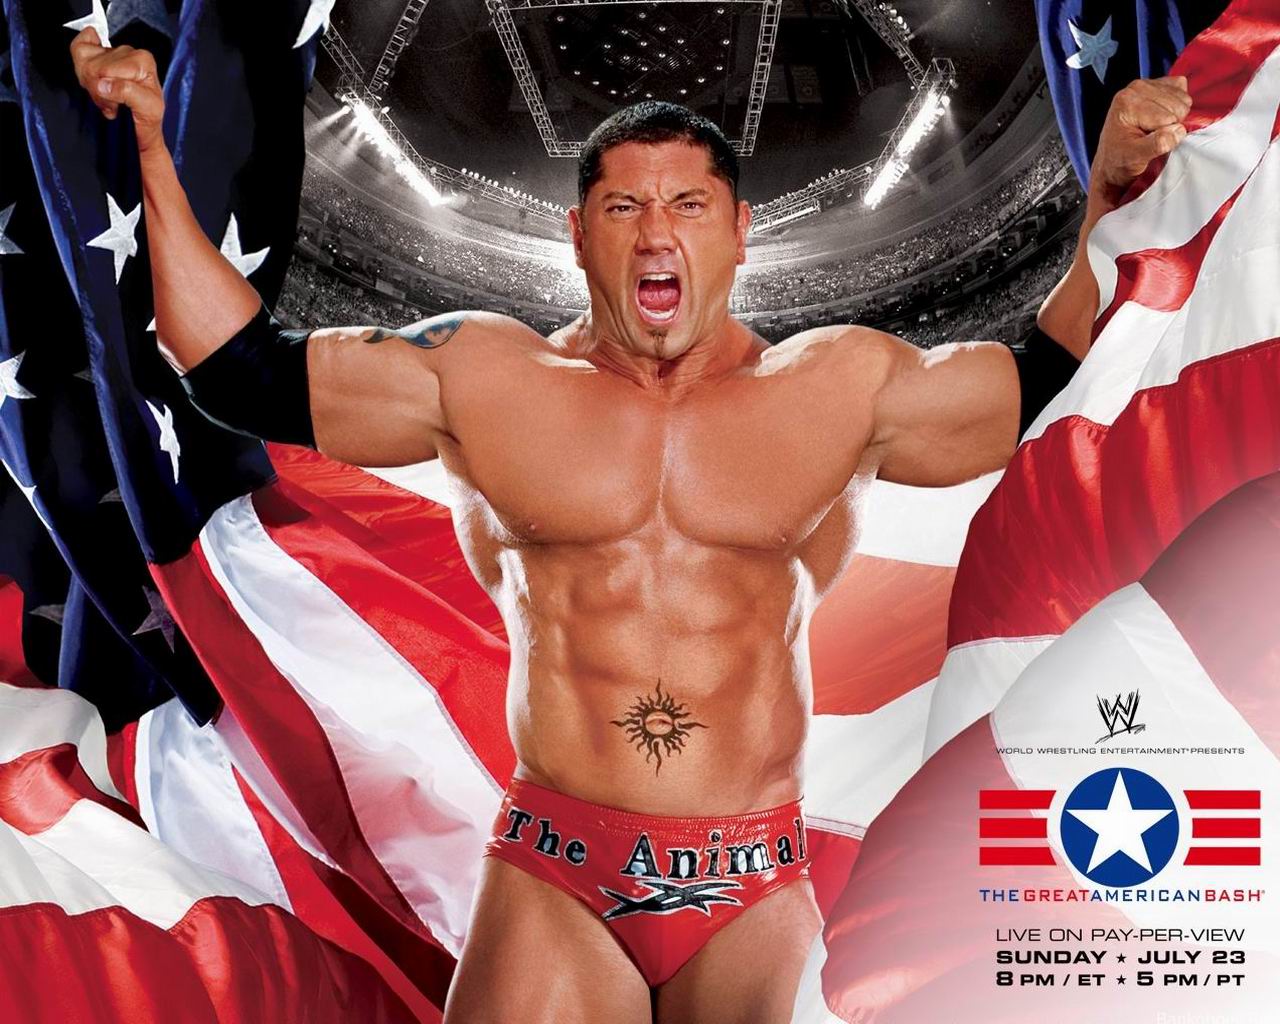 Download HQ The Great American Bash Wrestling WWE wallpaper / 1280x1024